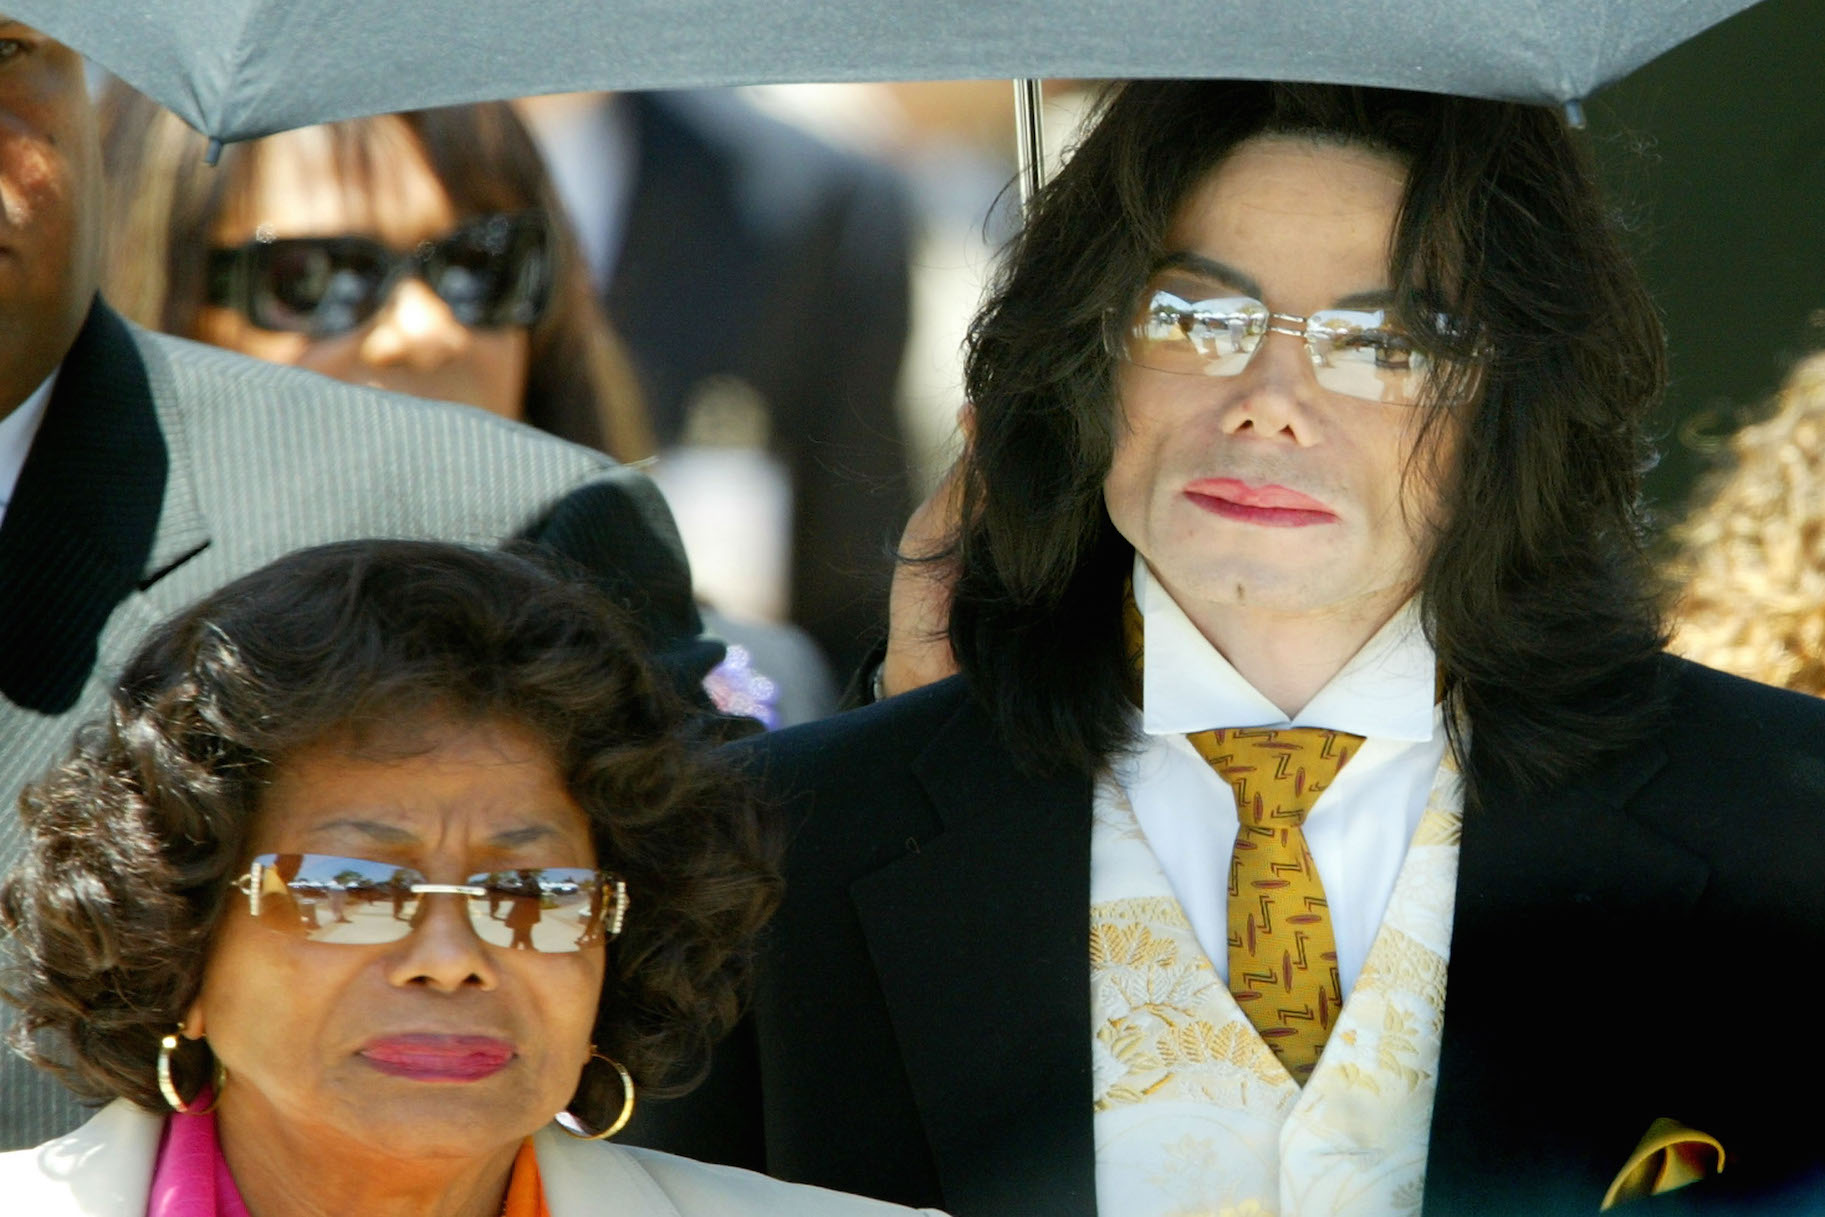 Michael Jackson's Mom Claims She Was Abused By Nephew | Crime Time1825 x 1217